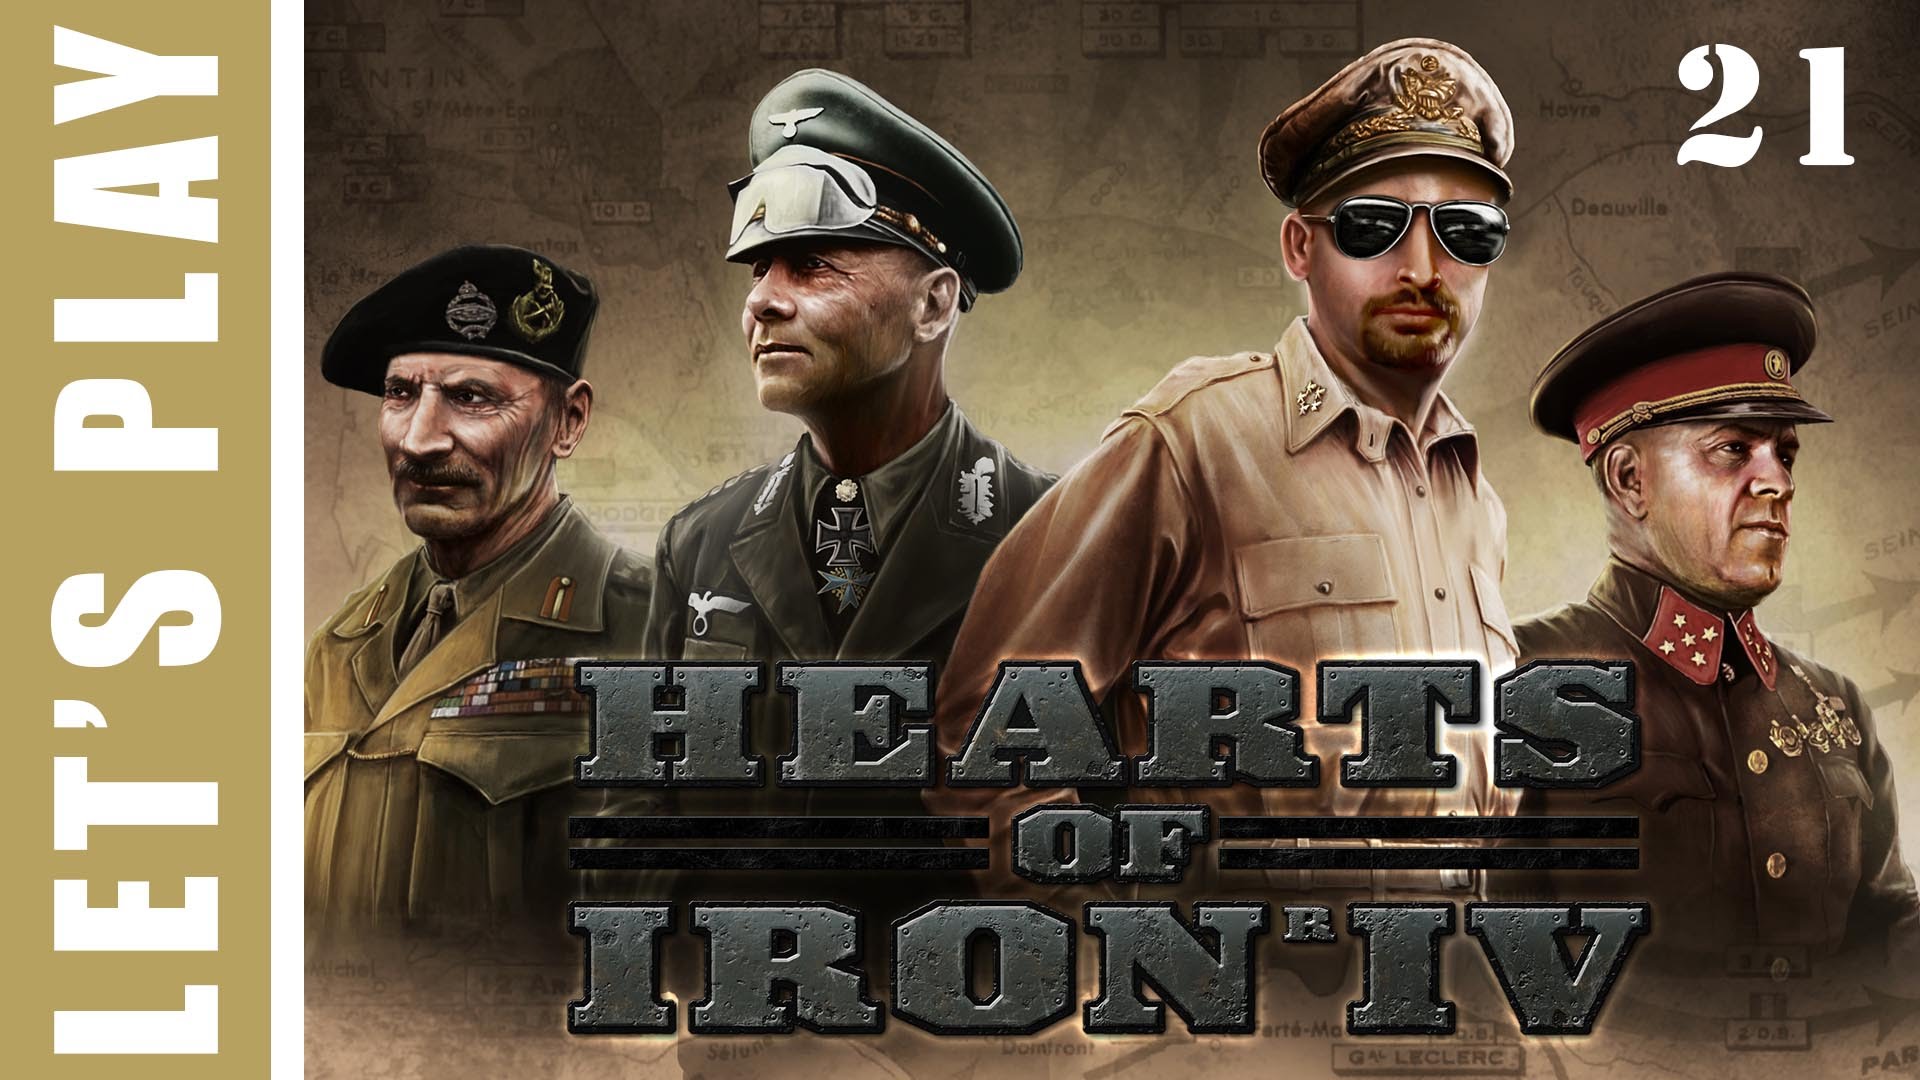 Hearts of Iron IV Germany Wins World War 2 Let’s Play 21